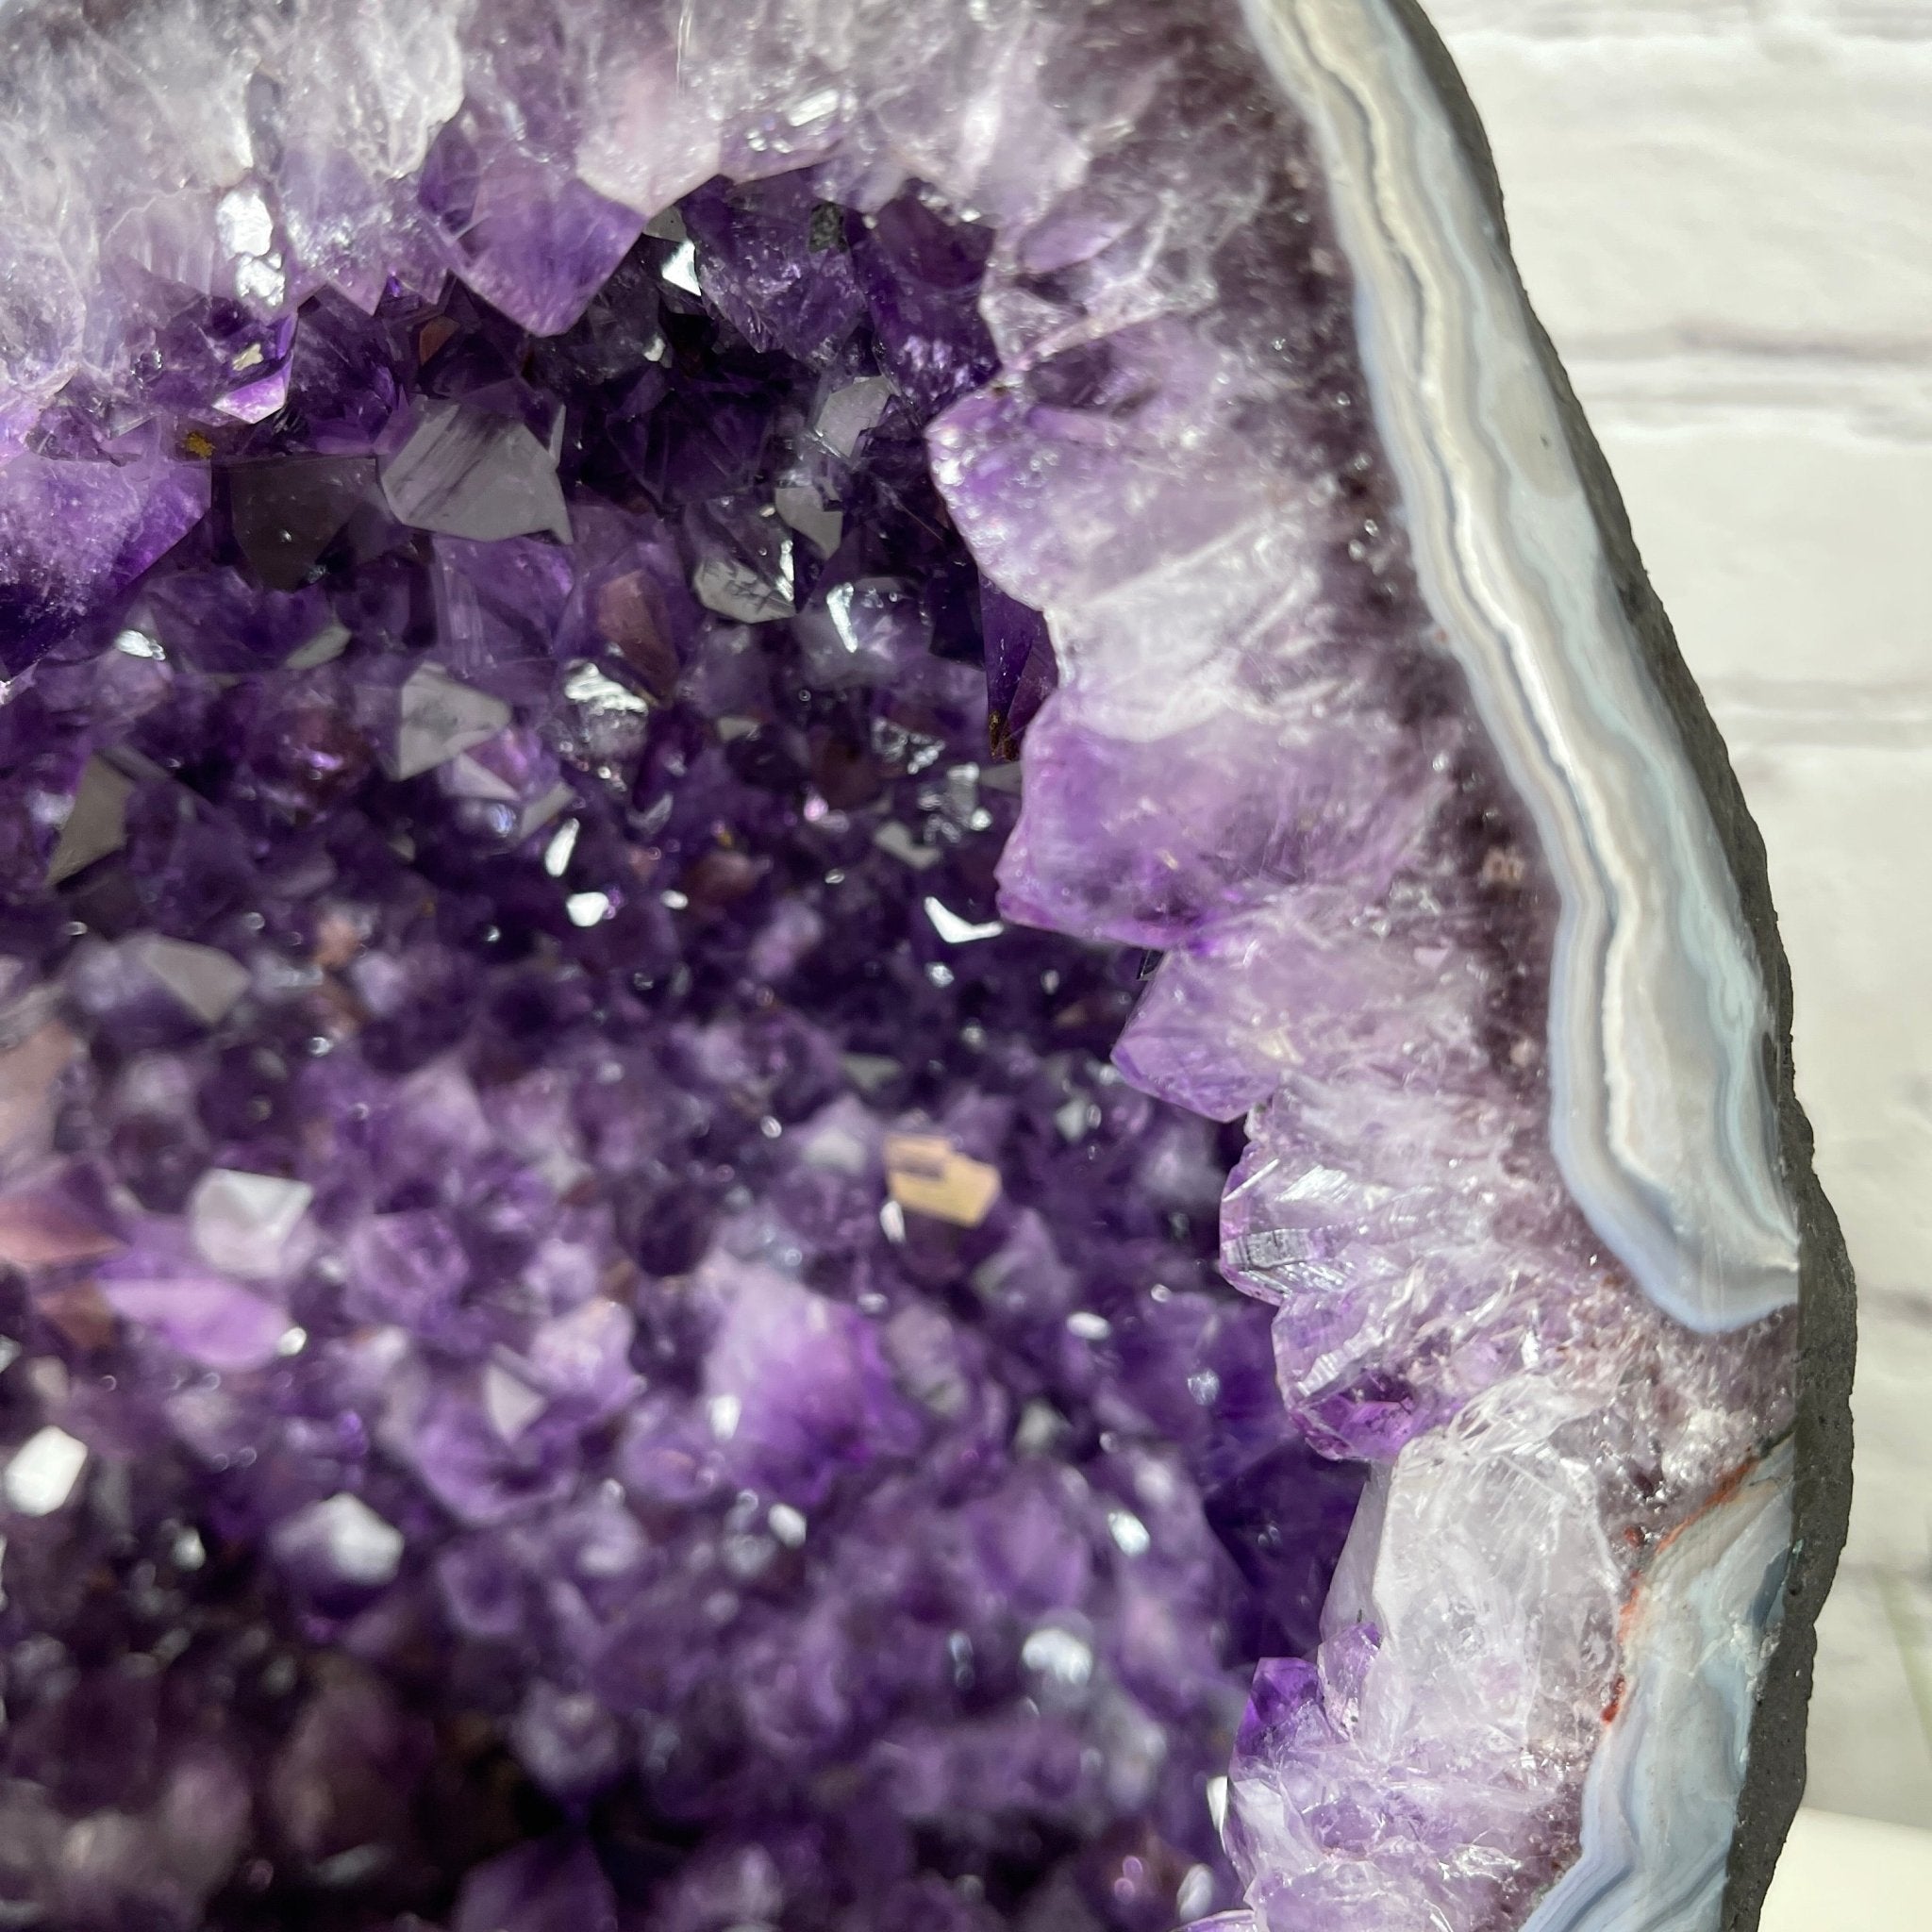 Extra Quality Brazilian Amethyst Cathedral, 11.75” tall & 25.9 lbs #5601-0472 by Brazil Gems - Brazil GemsBrazil GemsExtra Quality Brazilian Amethyst Cathedral, 11.75” tall & 25.9 lbs #5601-0472 by Brazil GemsCathedrals5601-0472